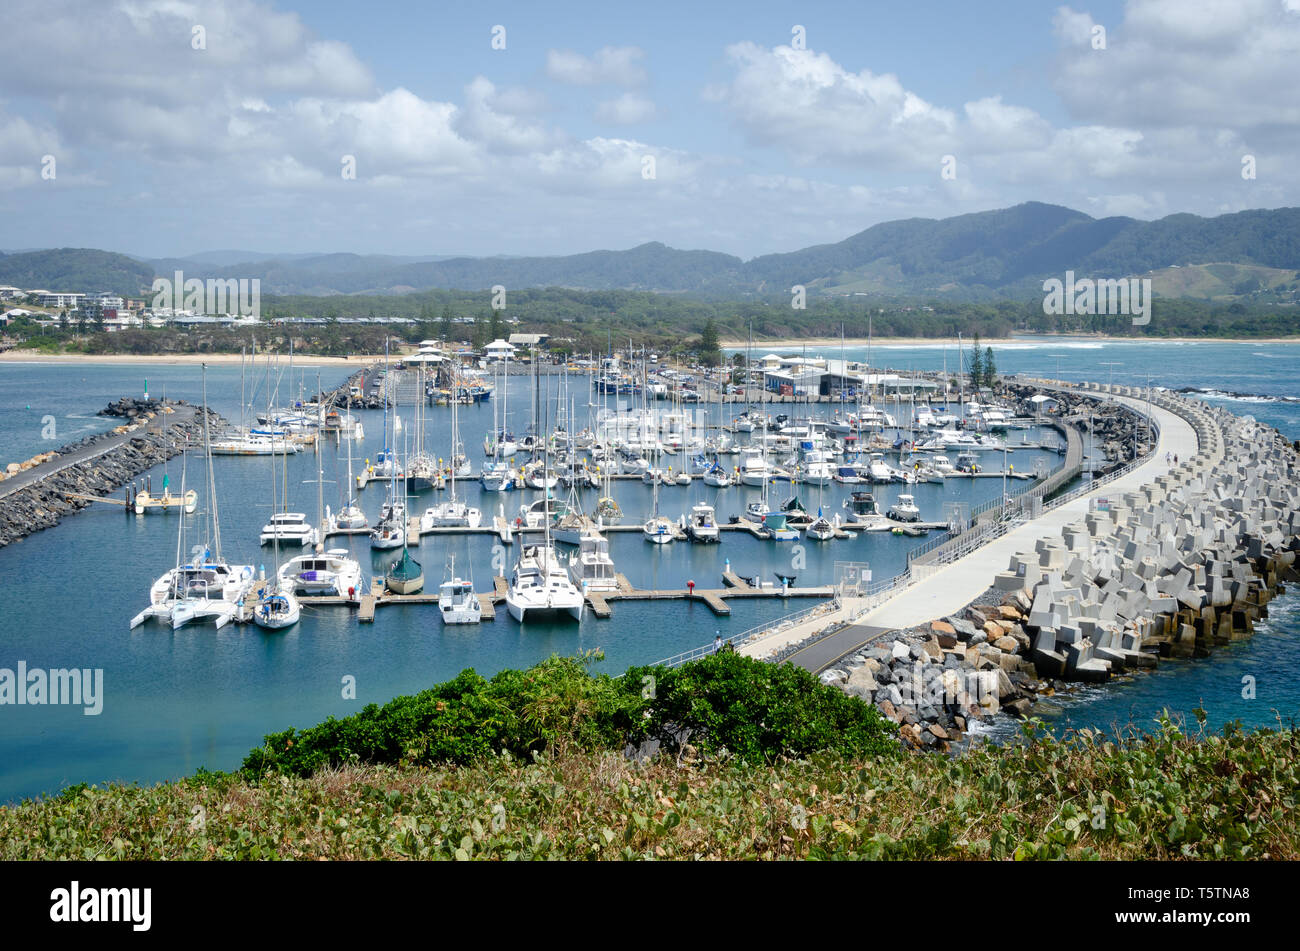 Boats in harbour at  Coffs Harbour, New South Wales, Australia Stock Photo